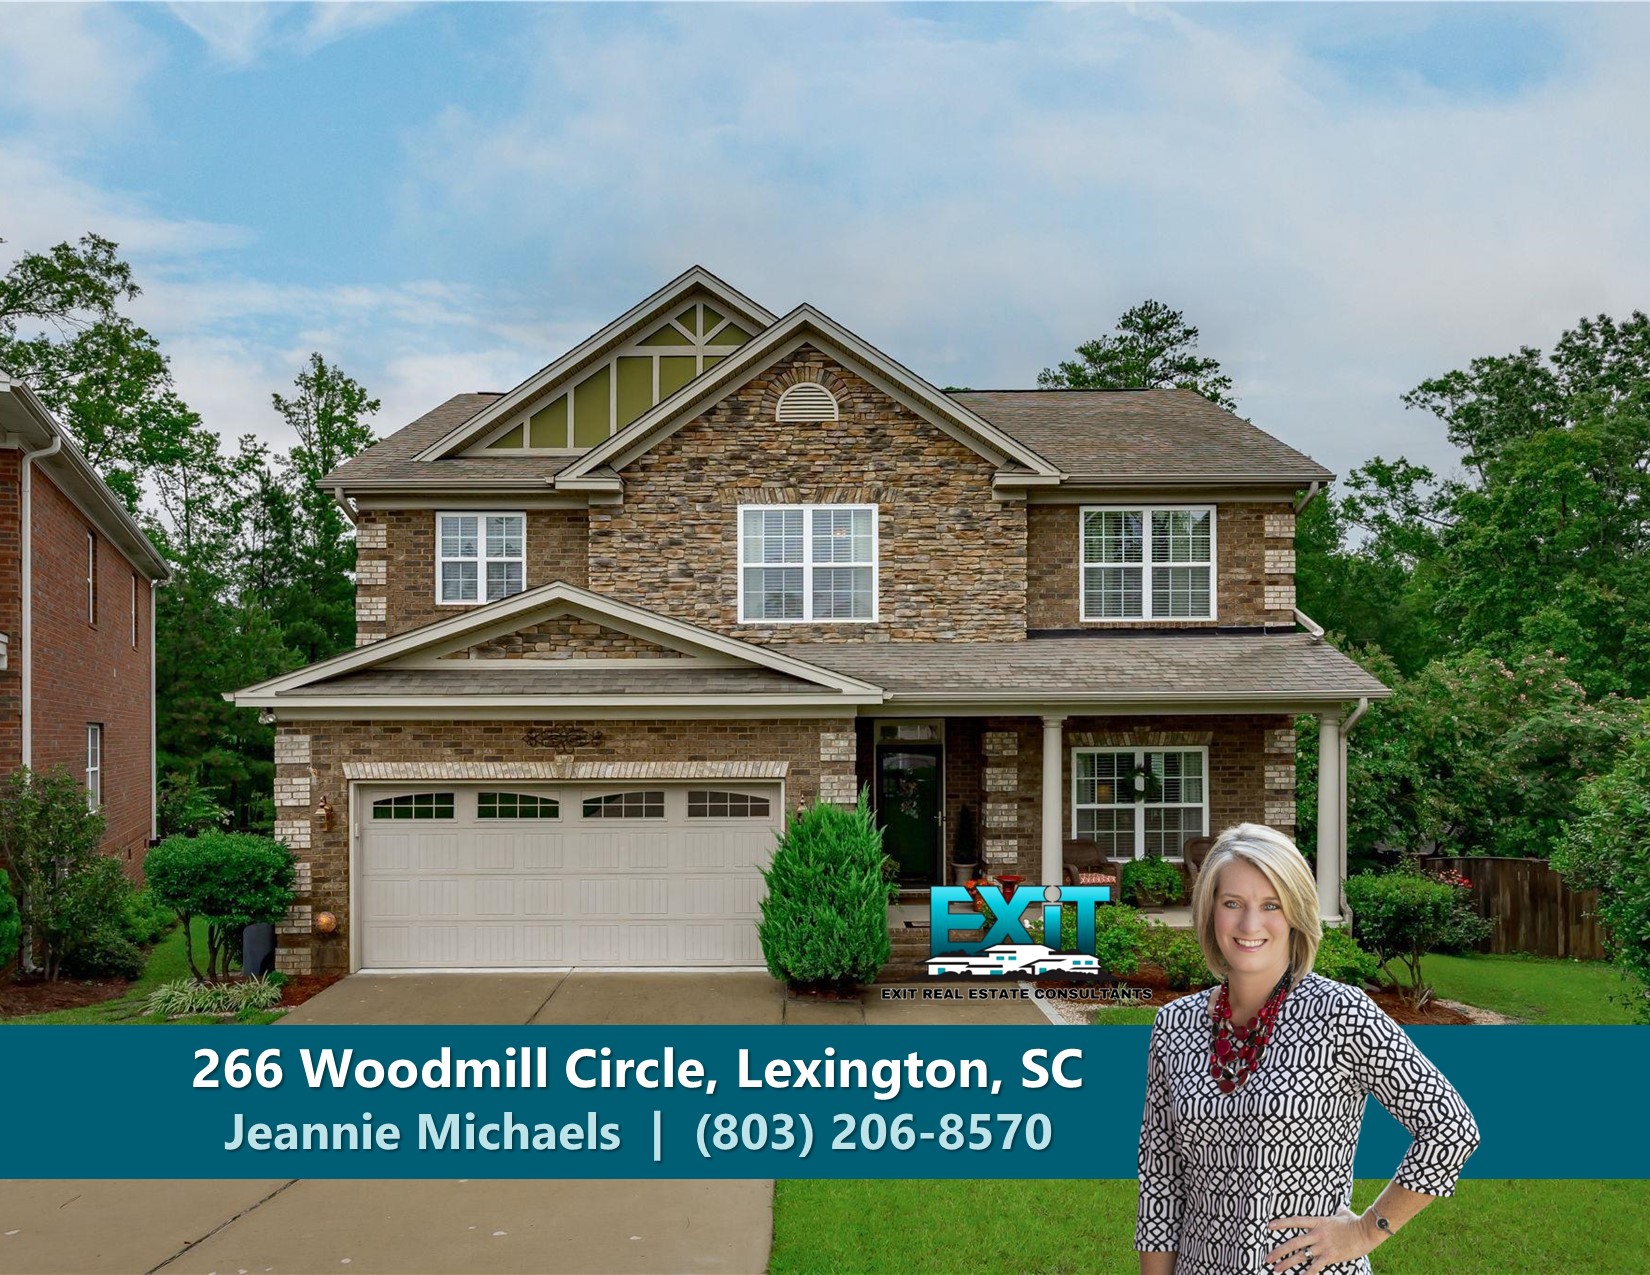 Just listed in Woodmill